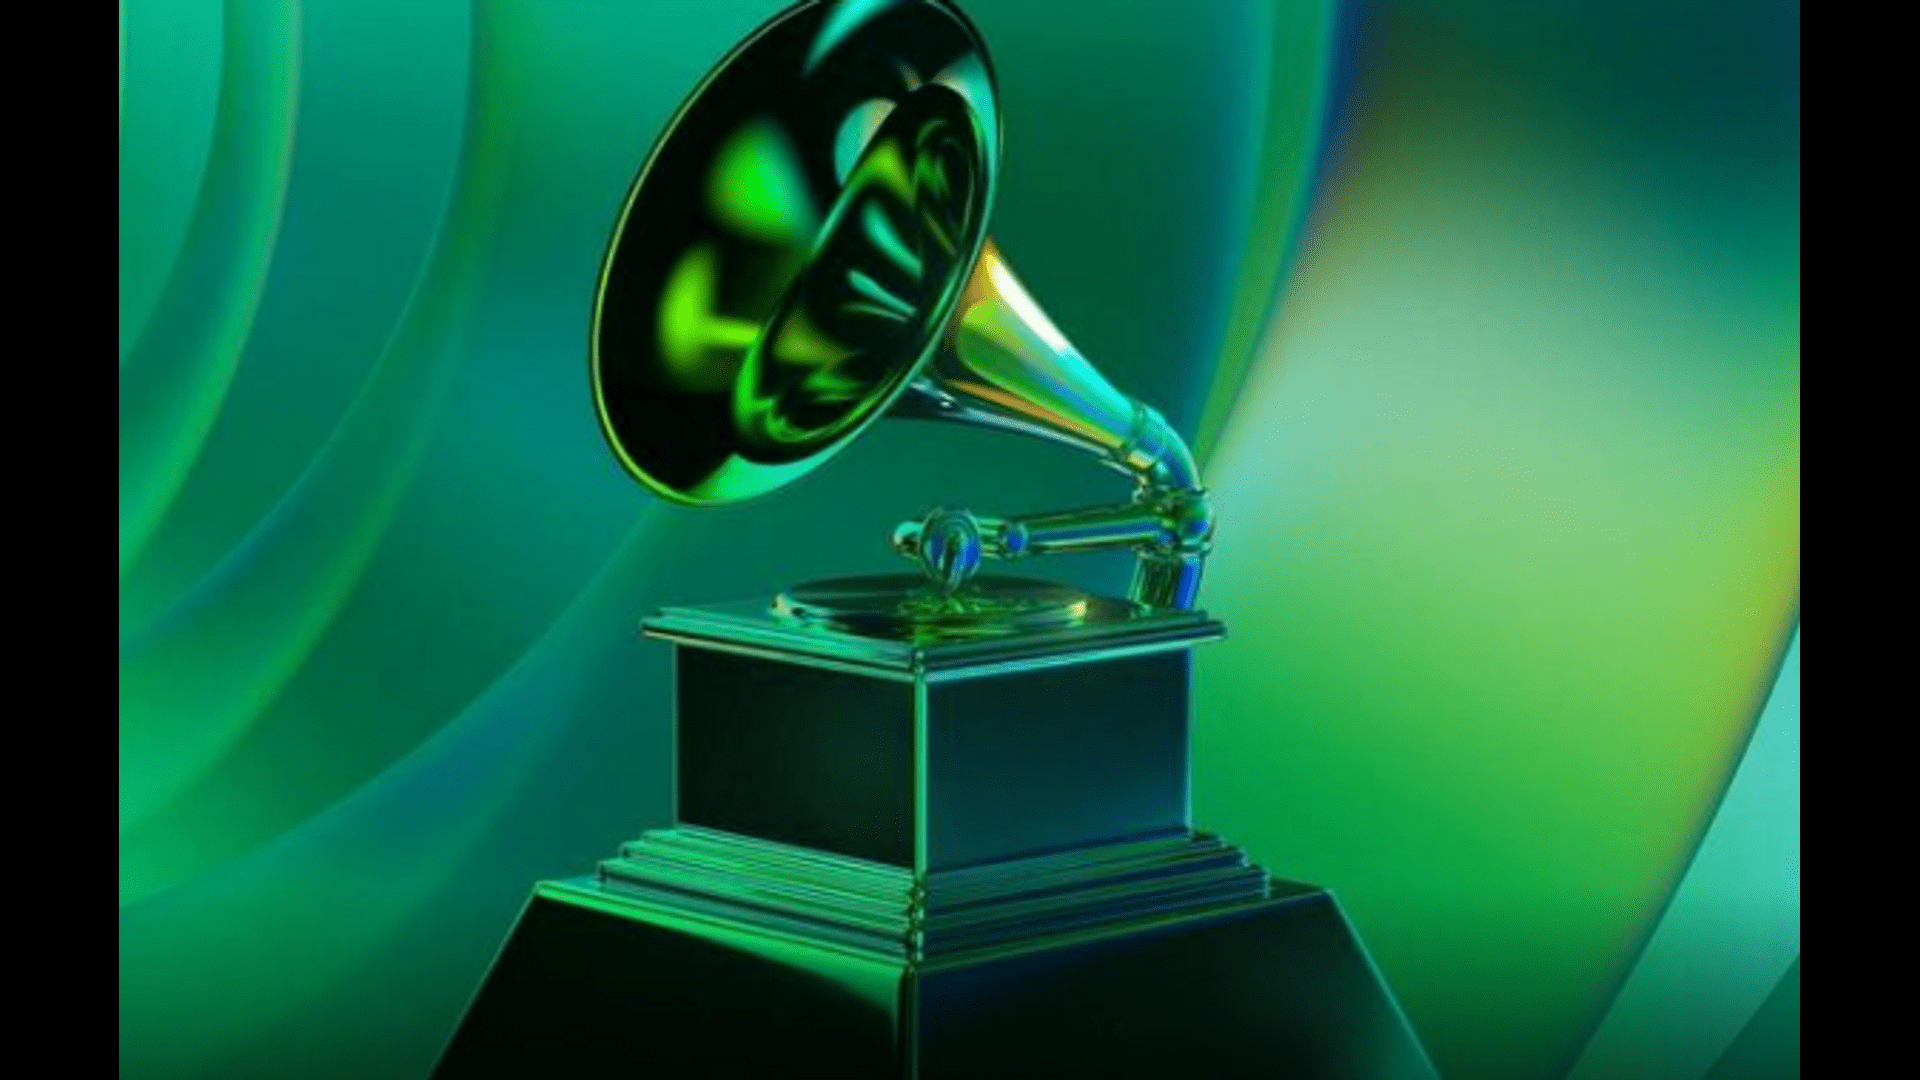 Grammy Awards 2022: complete list, who are the favorites